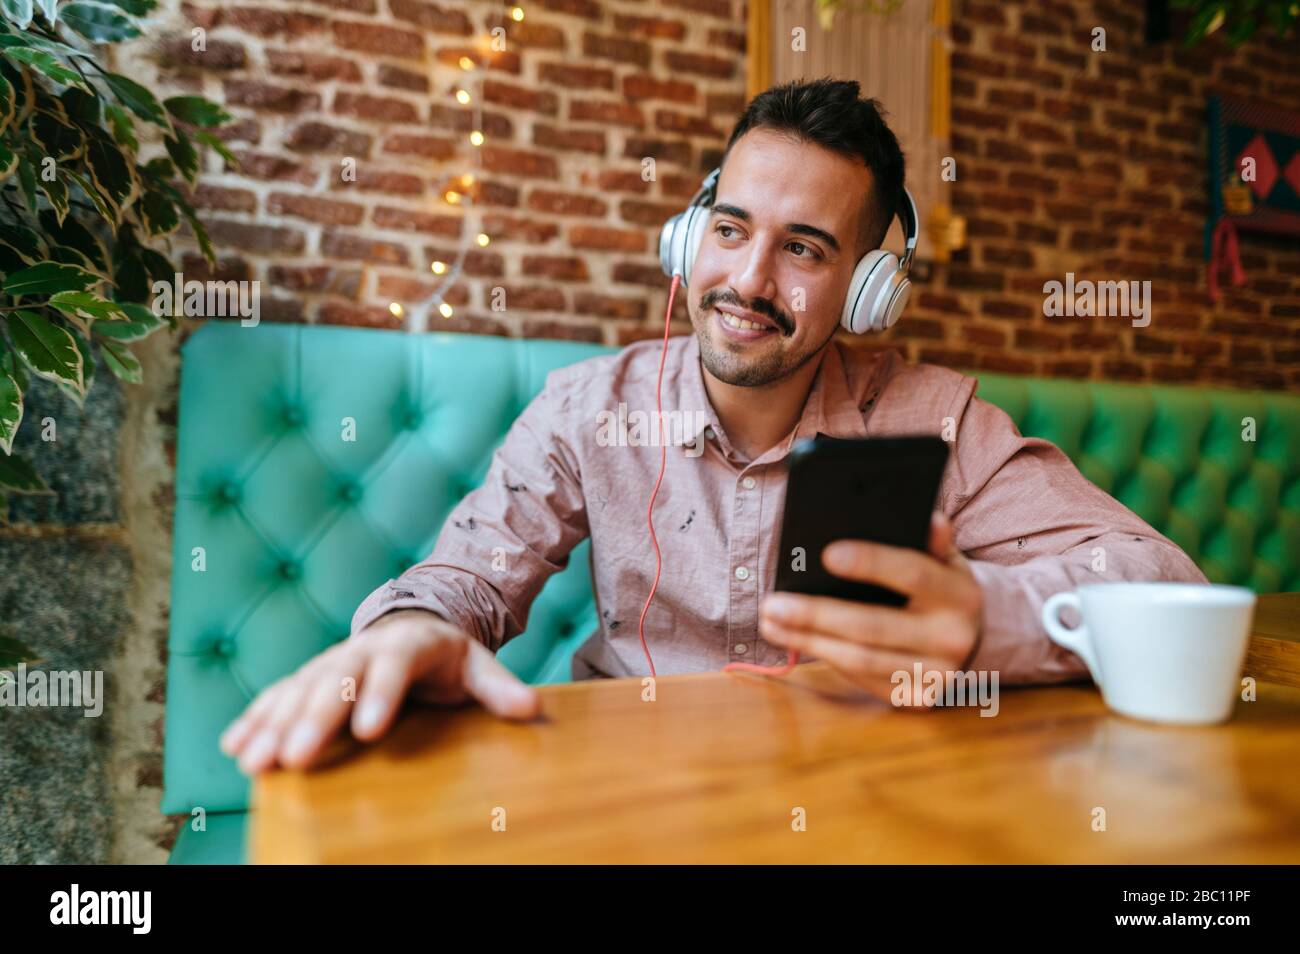 Smiling man in a cafe listening to music with headphones Stock Photo